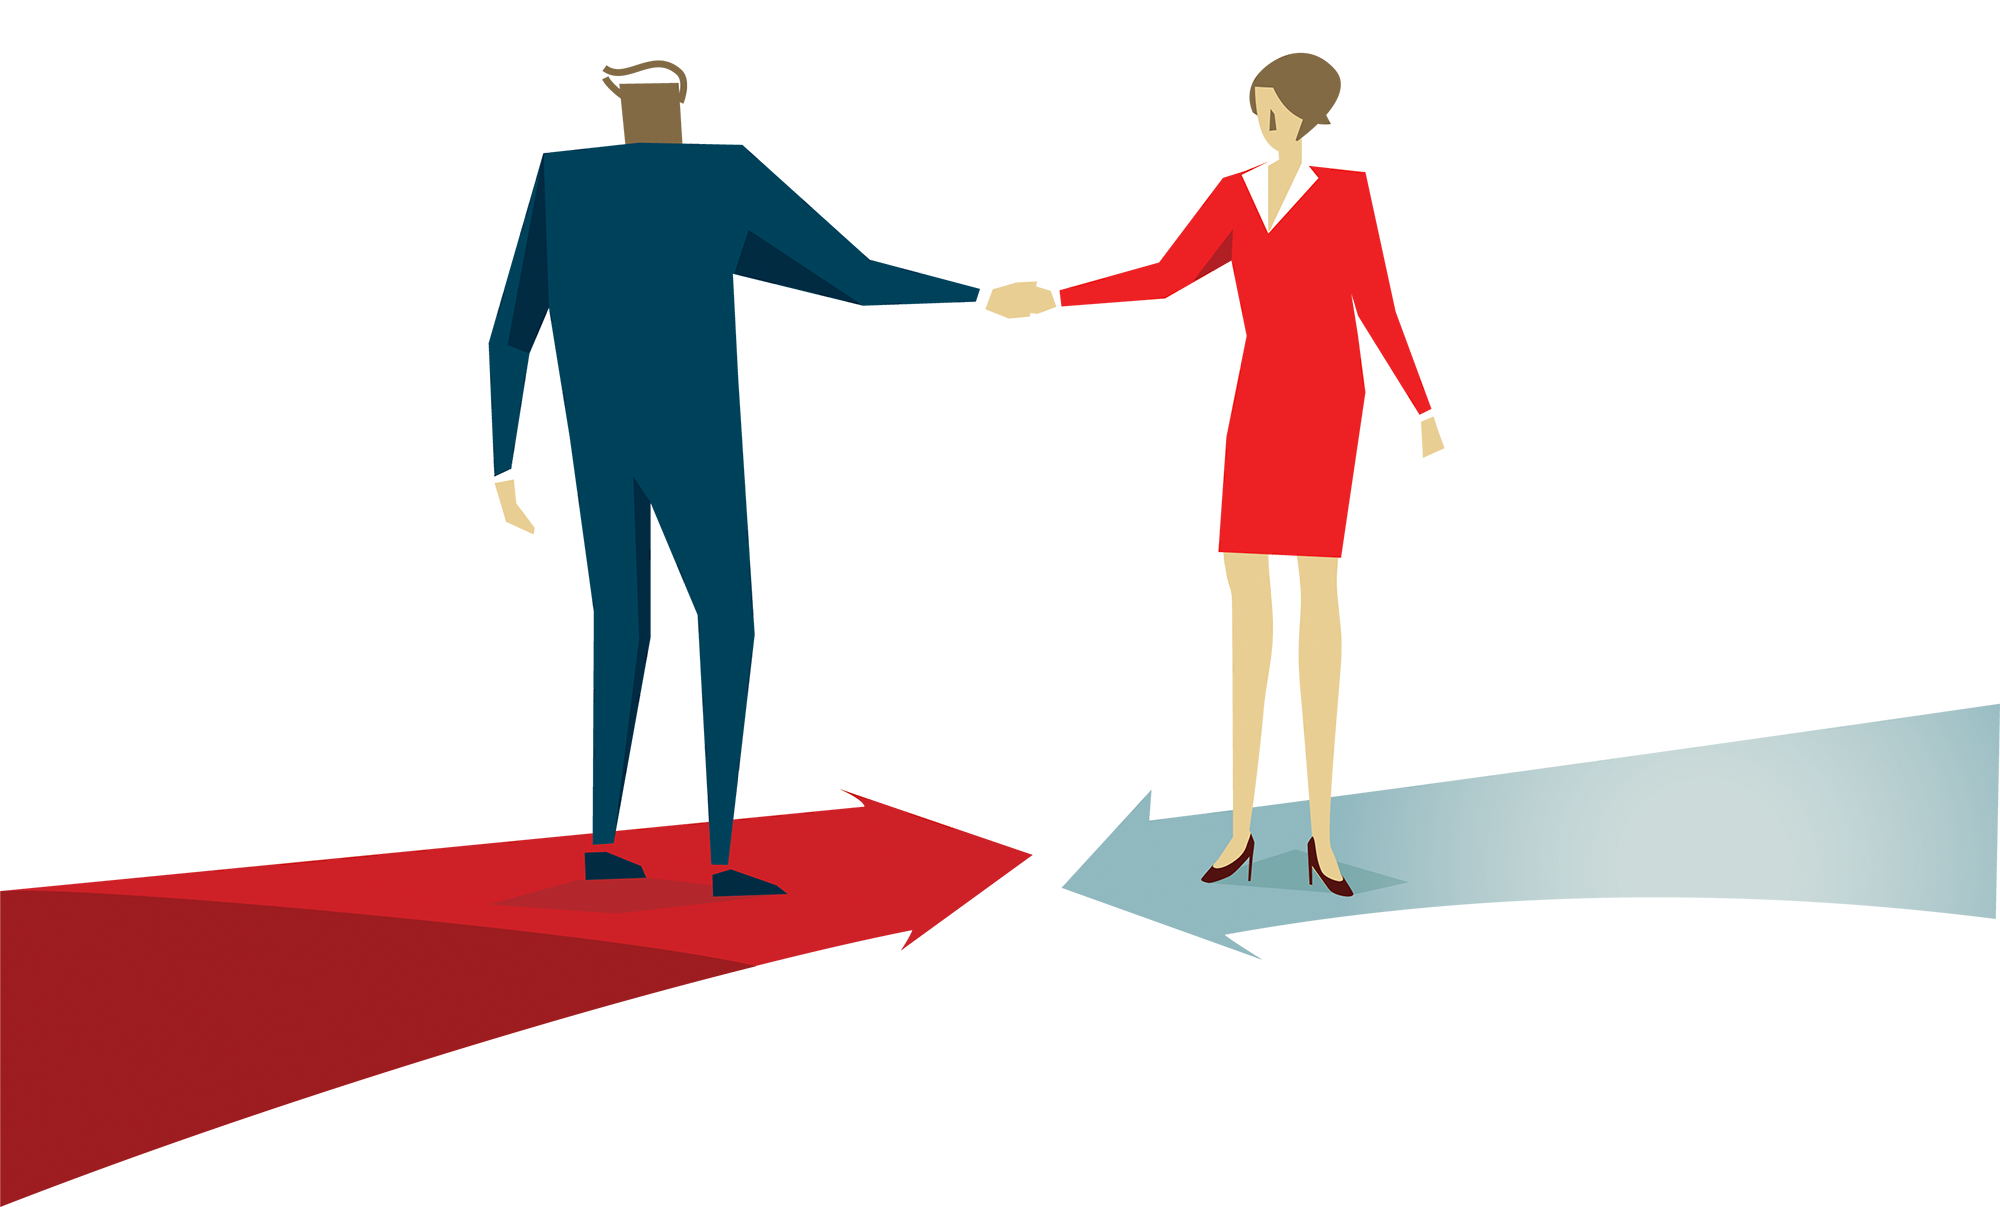 Illustration of Man and Women Shaking Hands